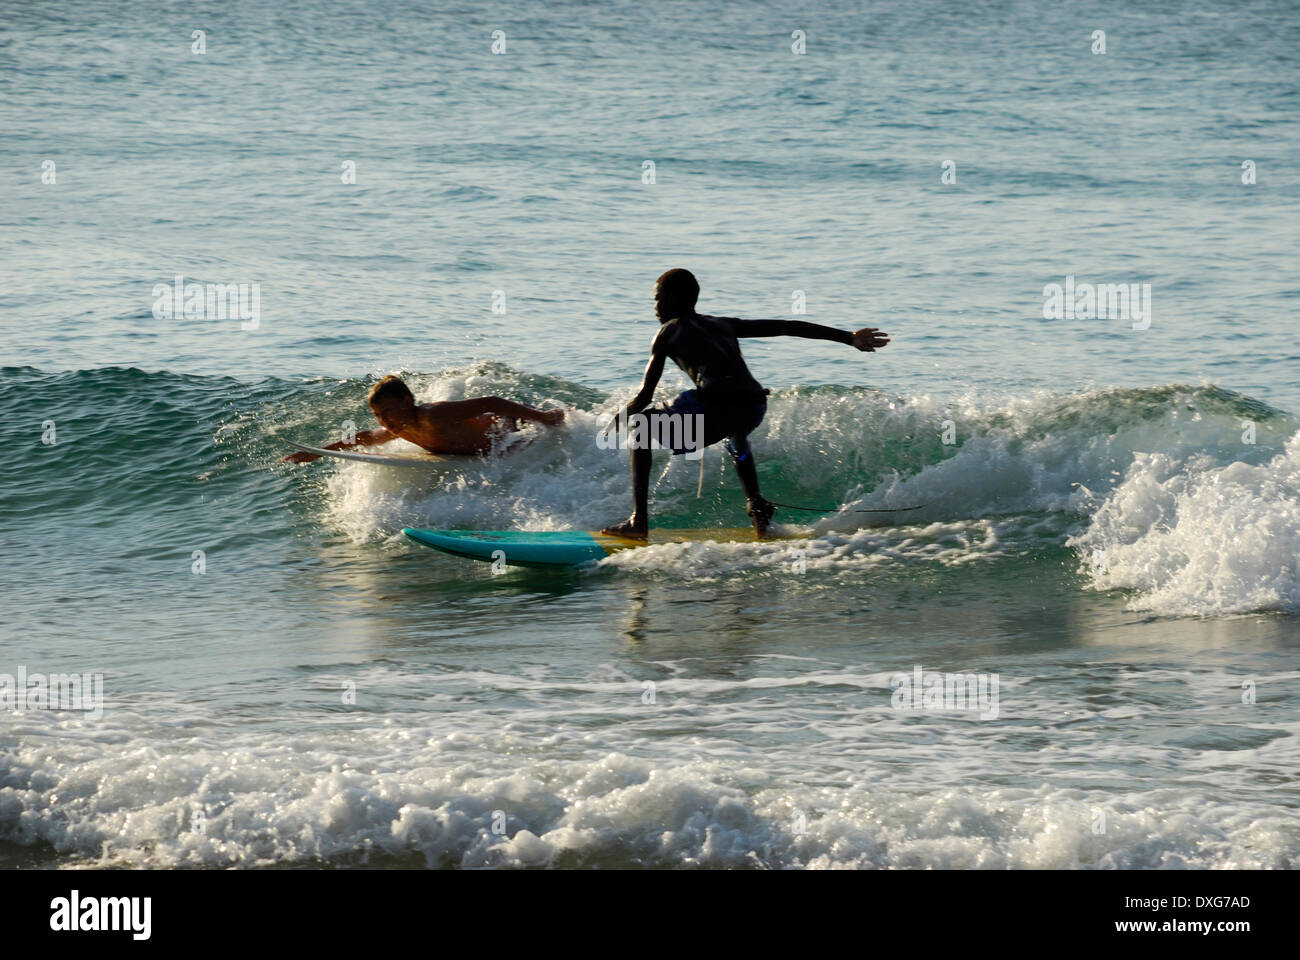 Young black Mozambican boy surfing with white boy at Tofo, Mozambique Stock Photo